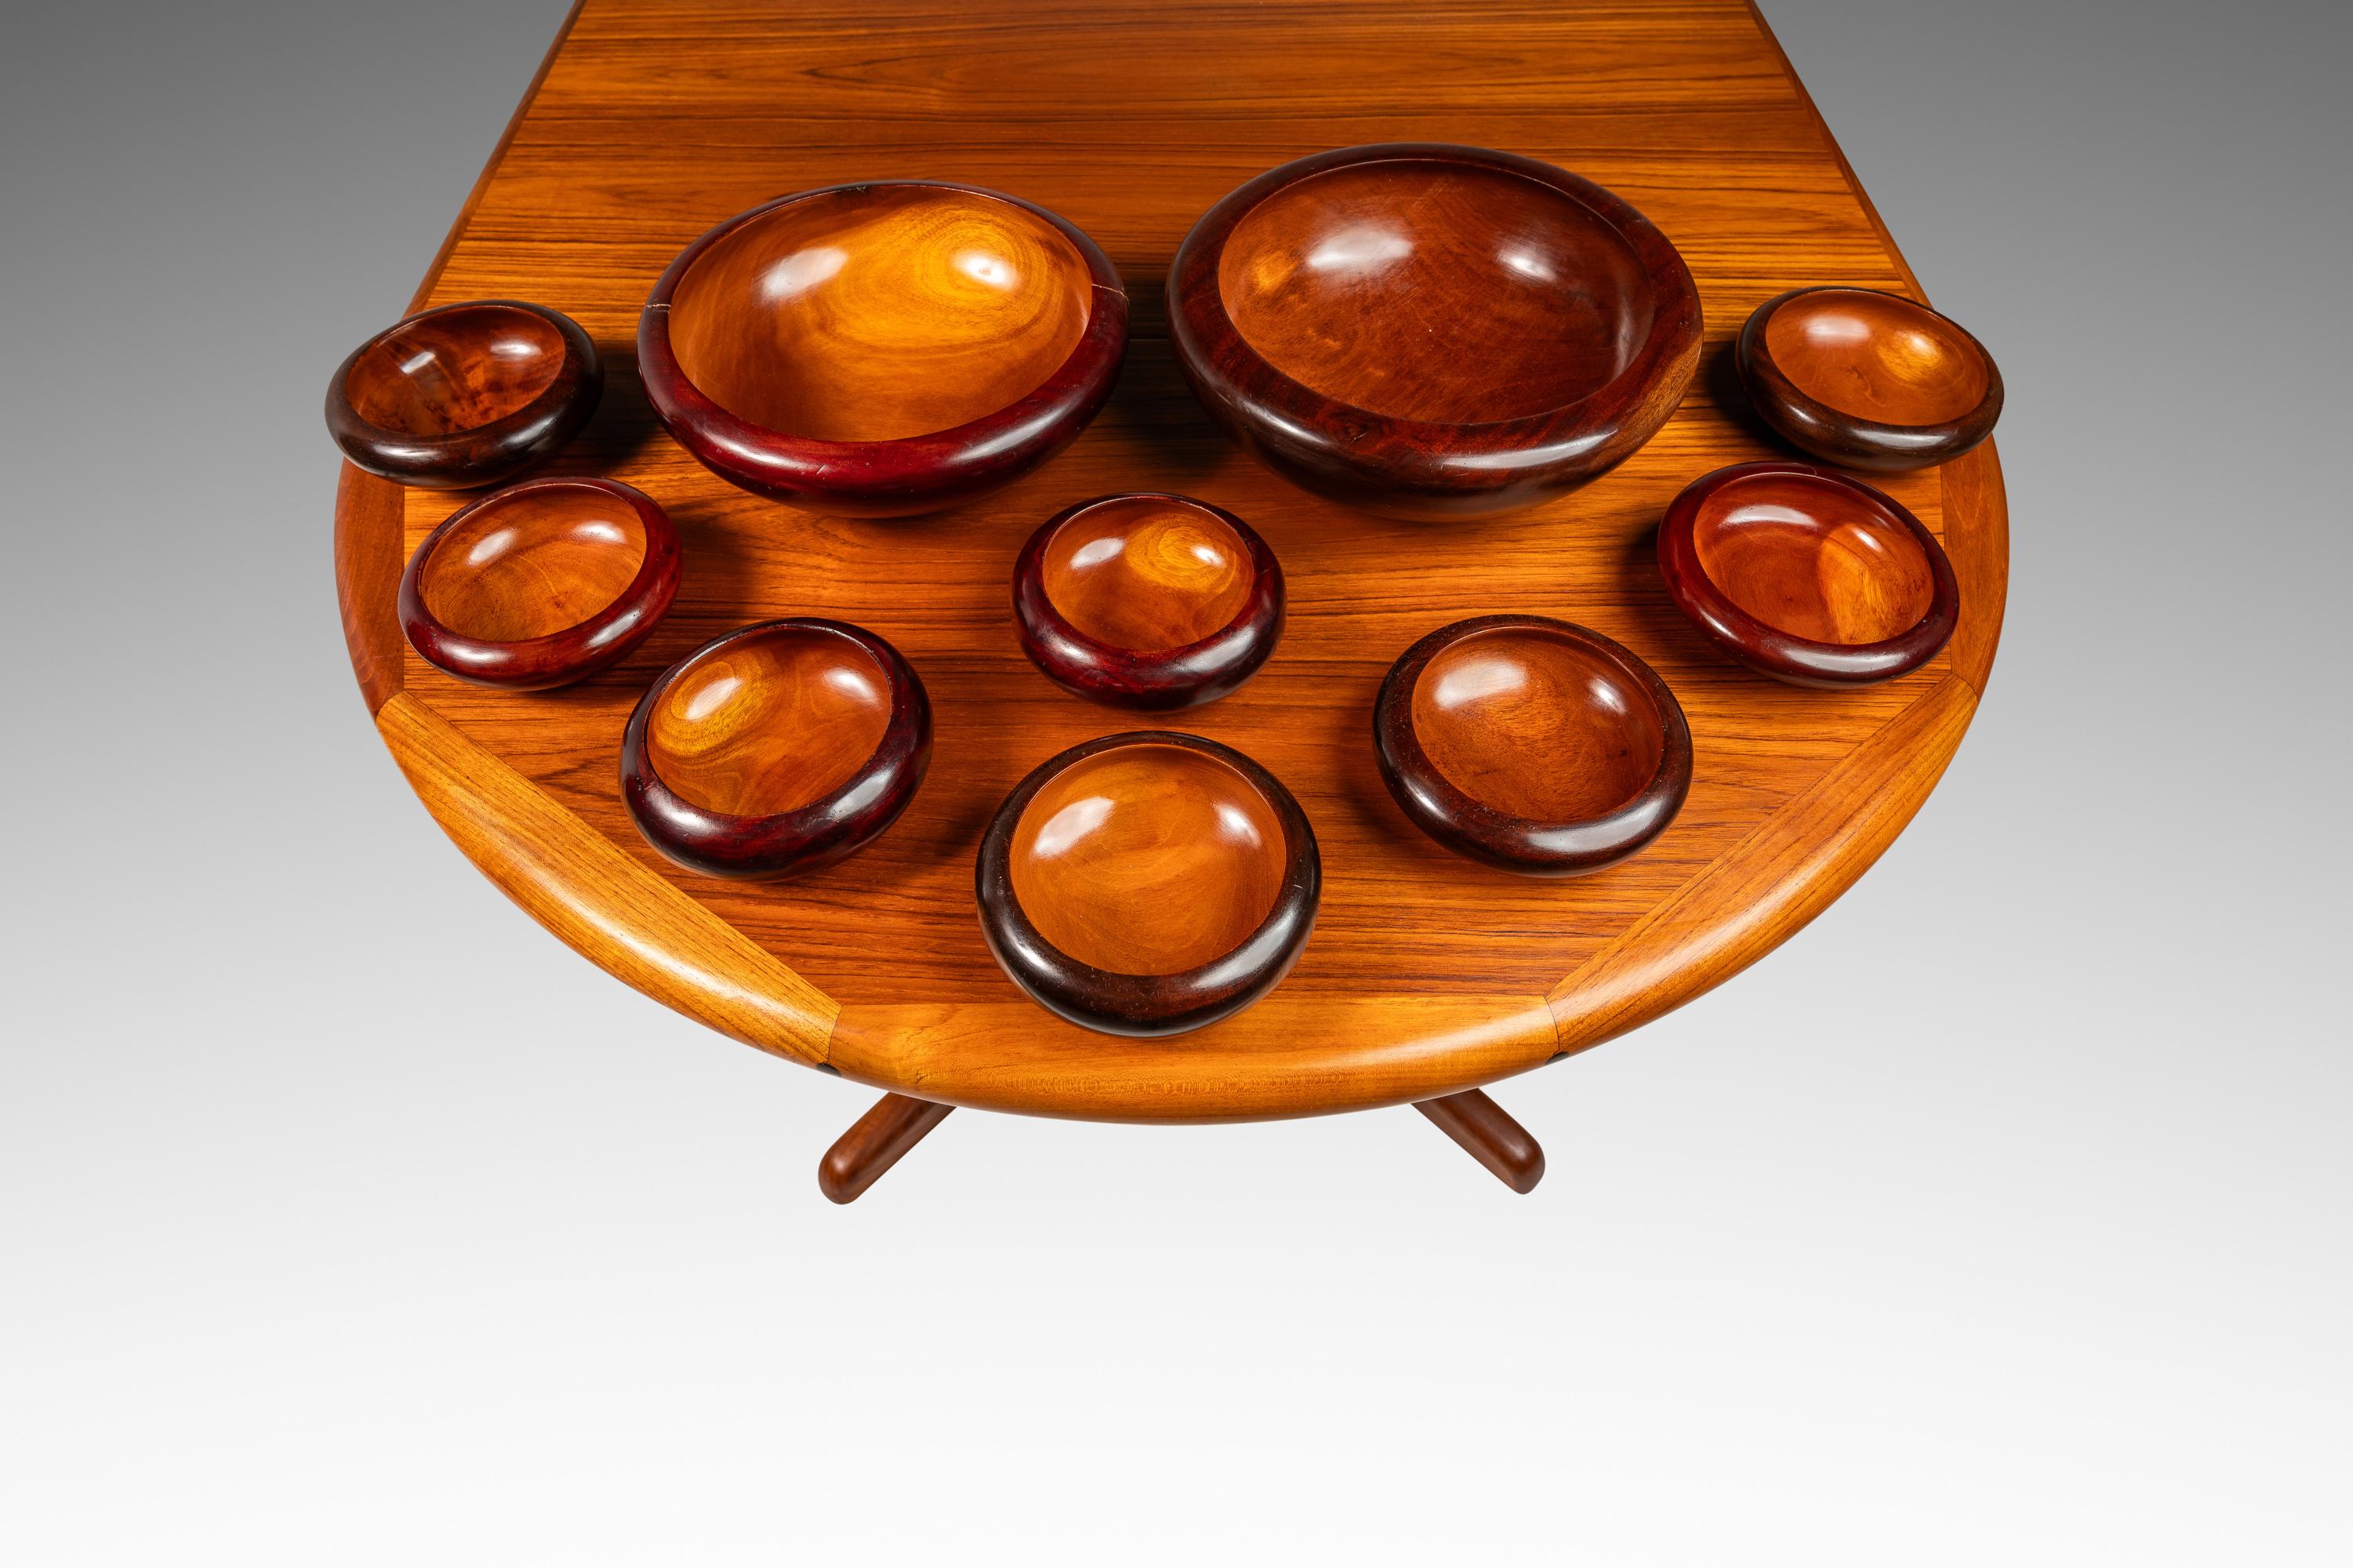 Set of 10 Organic Modern Hand-Turned Cherry Wood Serving Bowls, USA, c. 1960s For Sale 2